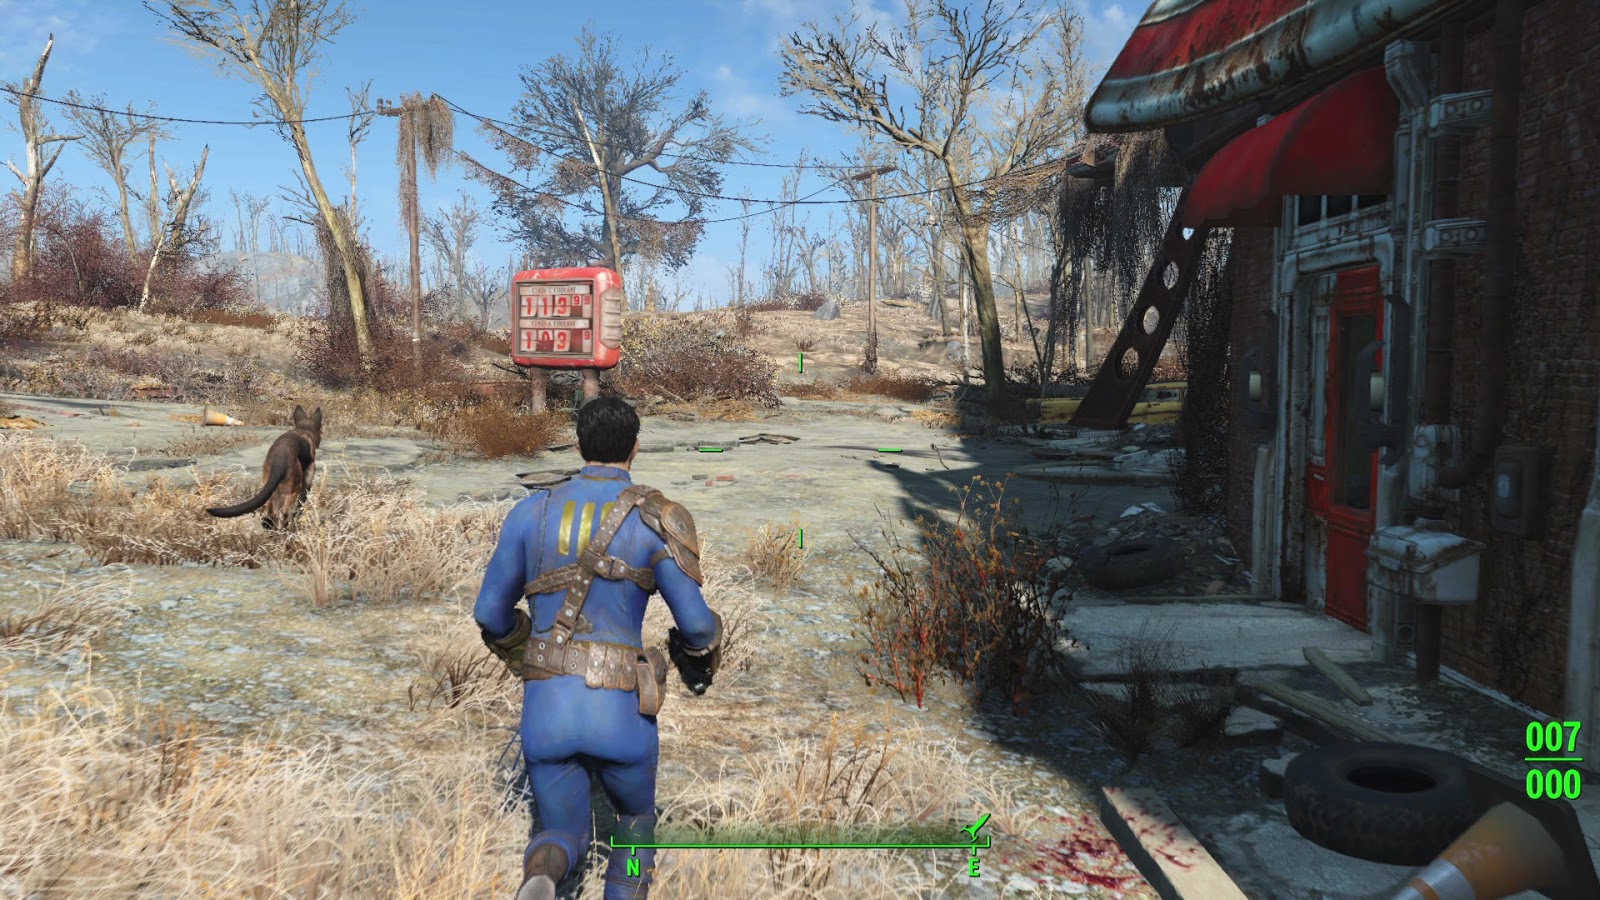 Download fallout 4 for pc - download fallout 4 free [Torrent]